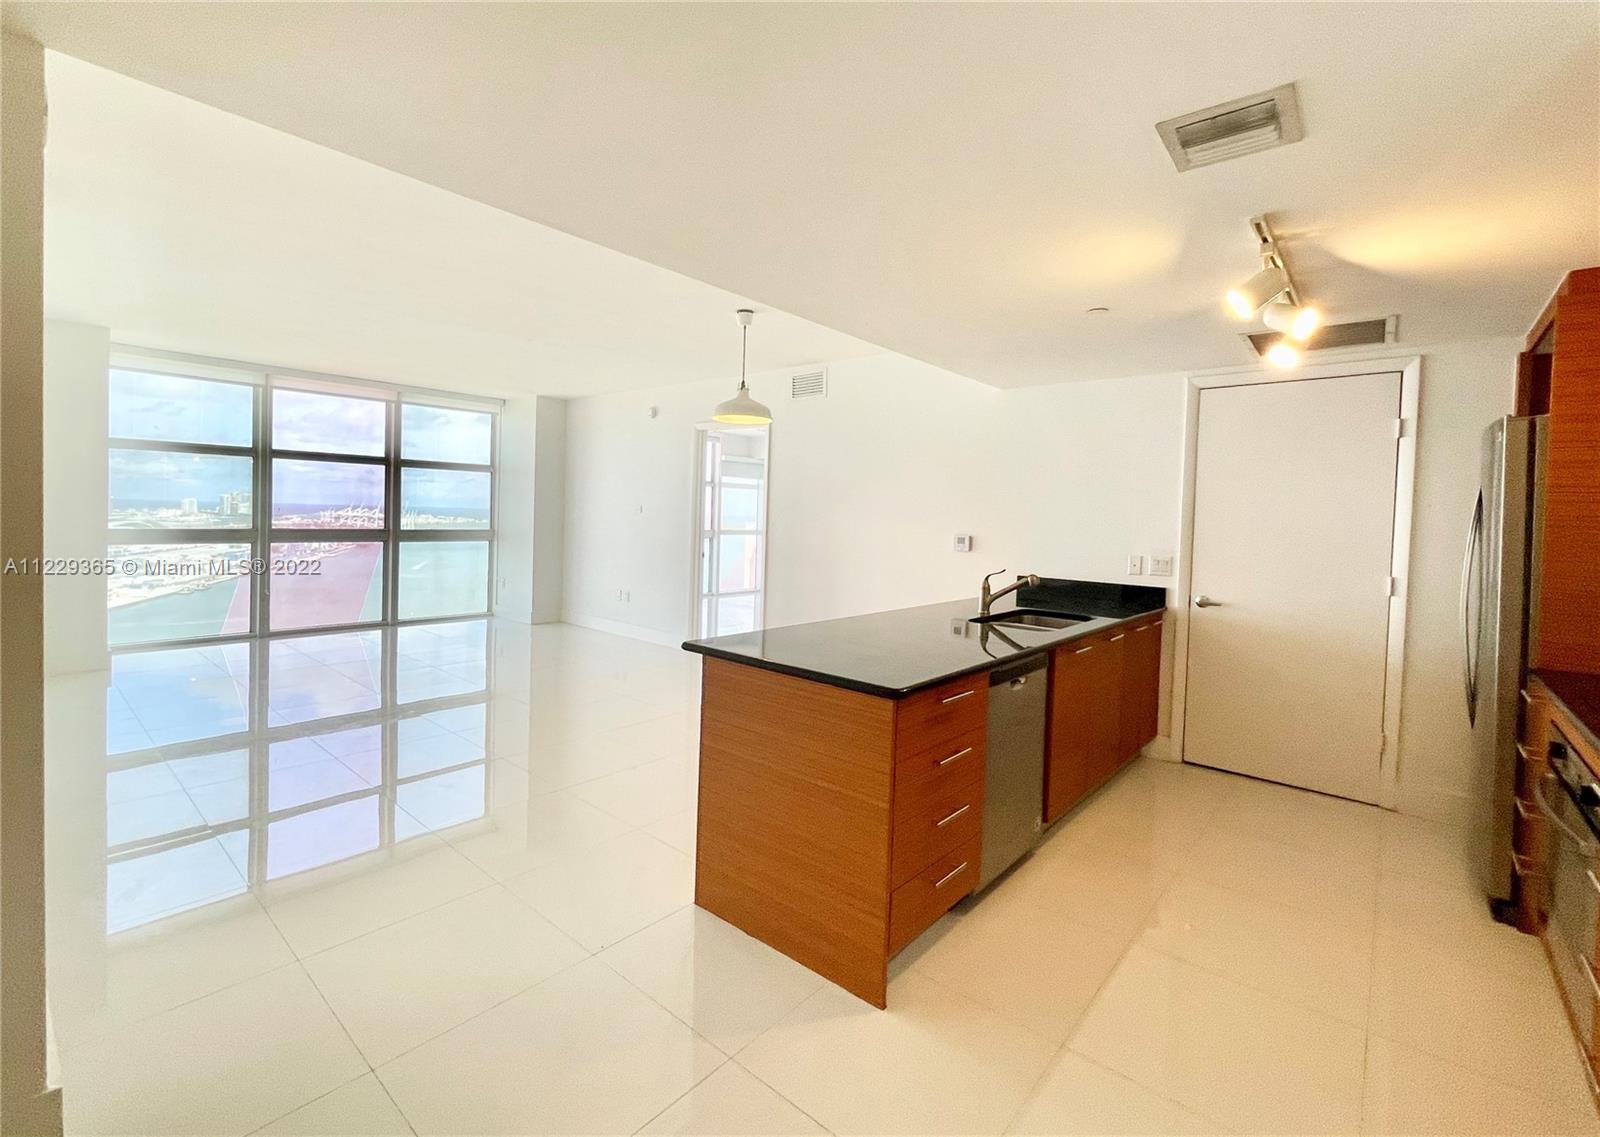 Beautiful 3bed/ 2 bath condo in the heart of downtown Miami. Den is being converted to the 3rd bedroom with a sliding door for flexibility. Breathtaking views of Biscayne Bay. Open kitchen layout, washer/dryer and one parking space. First class amenities: Olympic size-heated pool, spa/sauna, fitness center, security, valet parking, 24/7 concierge service and more. A great managed building and friendly staff. 
Prime location. Right across Bayfront Park, Bayside Marketplace, Walgreens, and free metromover to Brickell. Walk to FTX Arena, Miami's top museums, Wholefoods, restaurants, and nightlife. Easy access to I-95 and 15 minutes from MIA airport. Unit has no balcony which make it perfect for families but still the most amazing unobstructive views in downtown. Don't wait! Won't last long